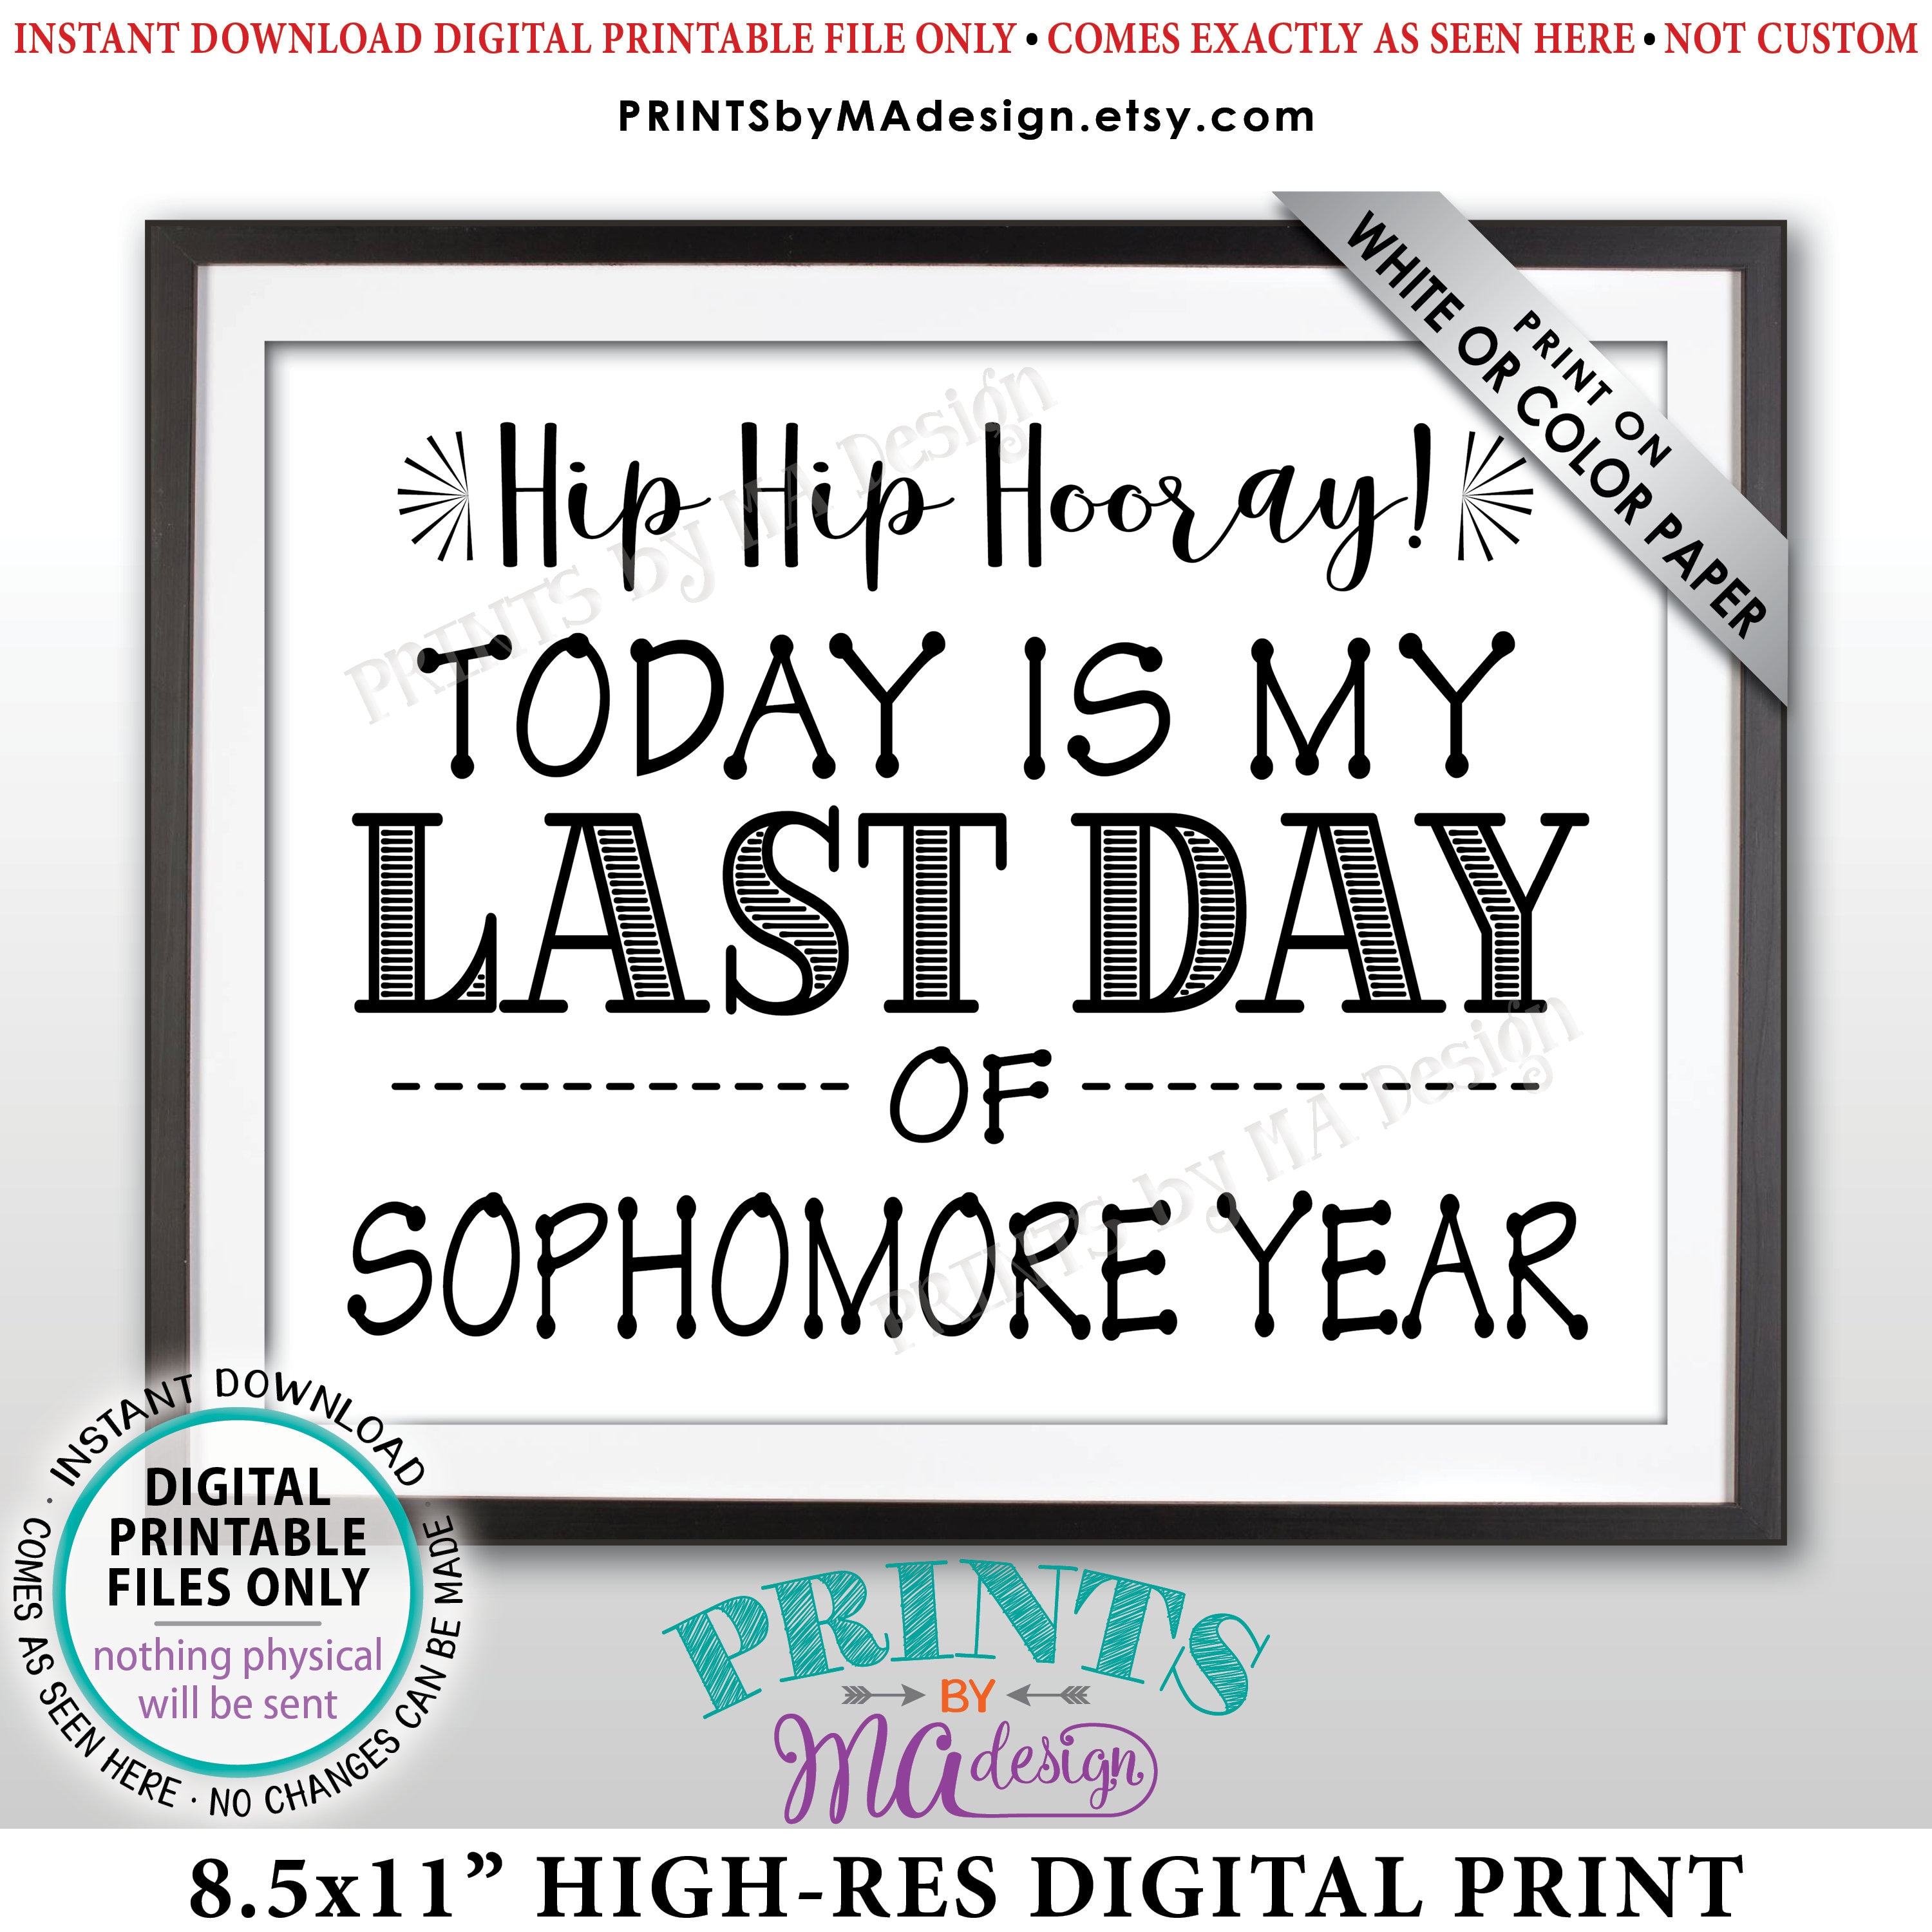 sale-last-day-of-school-sign-last-day-of-sophomore-year-sign-school